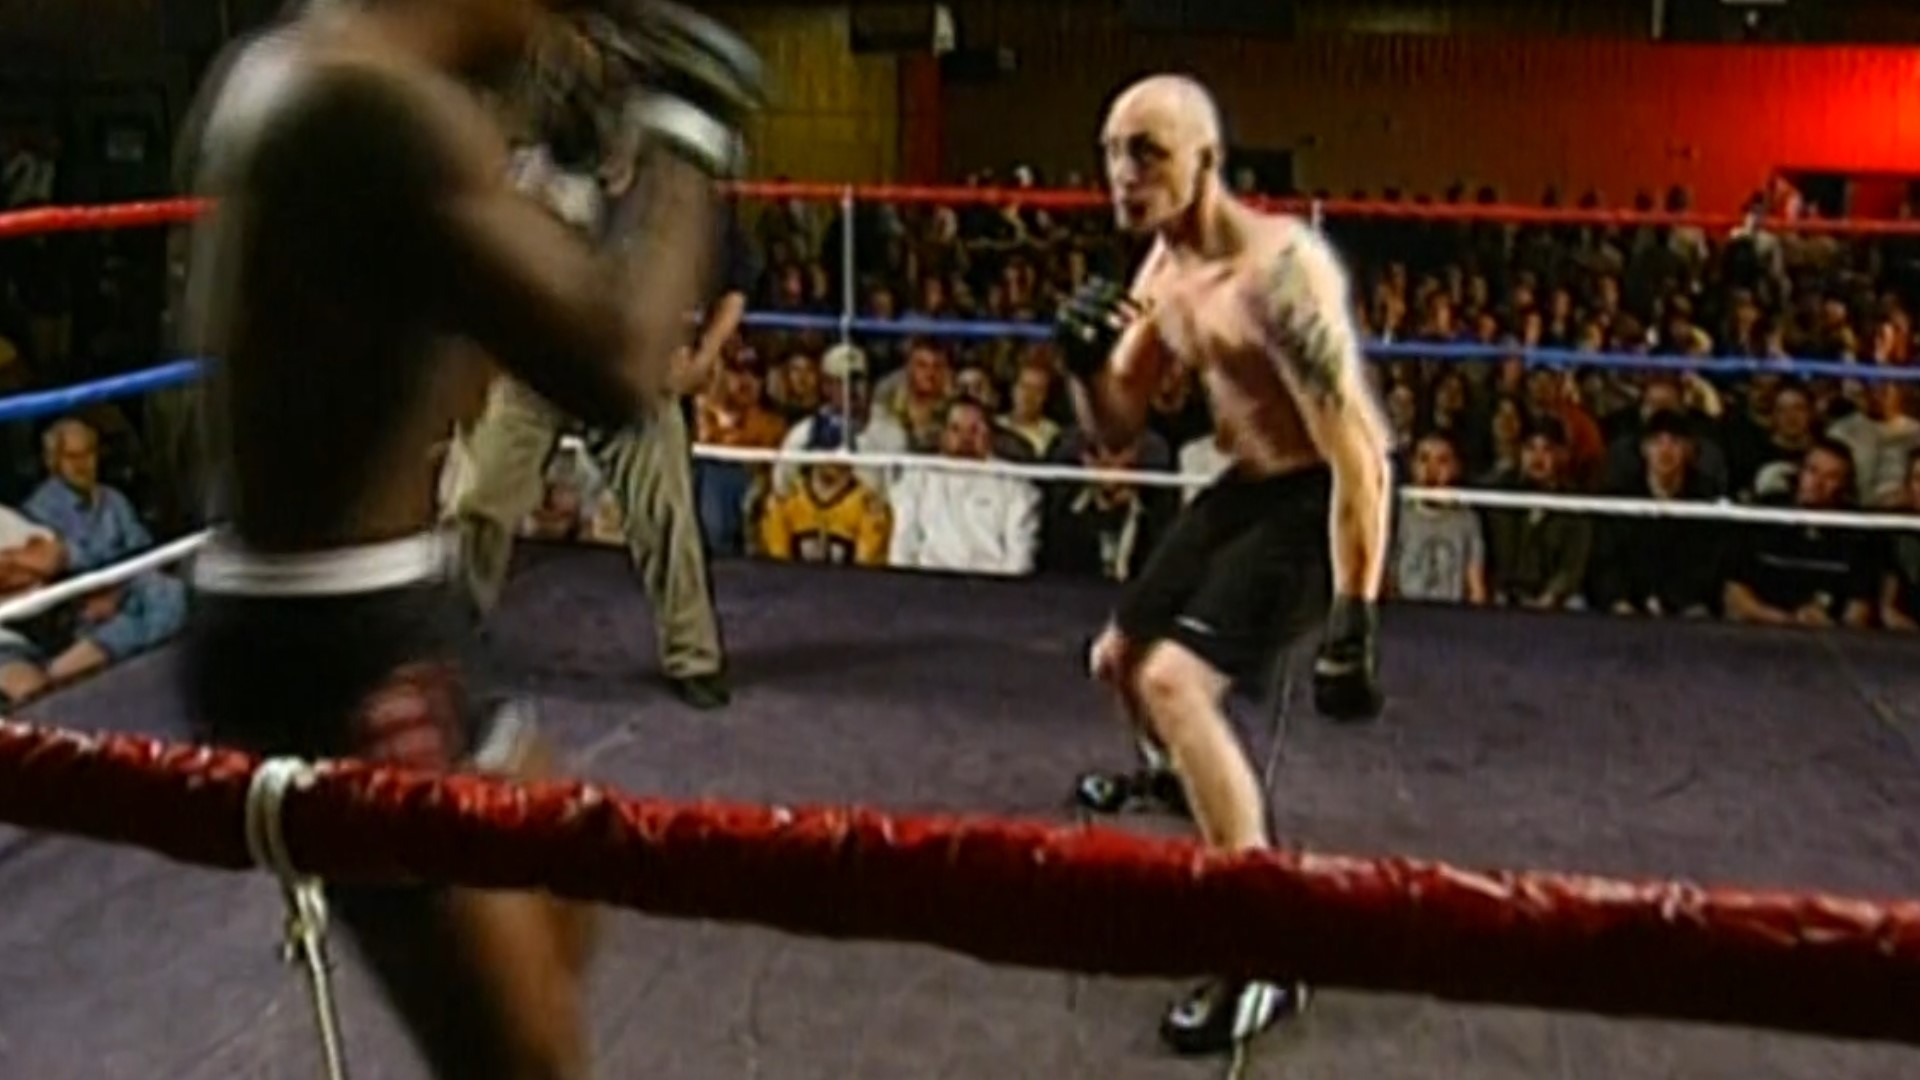 MMA-style fighting was just taking off in 2001 when Photojournalist Ron Stover checked out both a bingo game and a fight at the Knights of Columbus Hall.